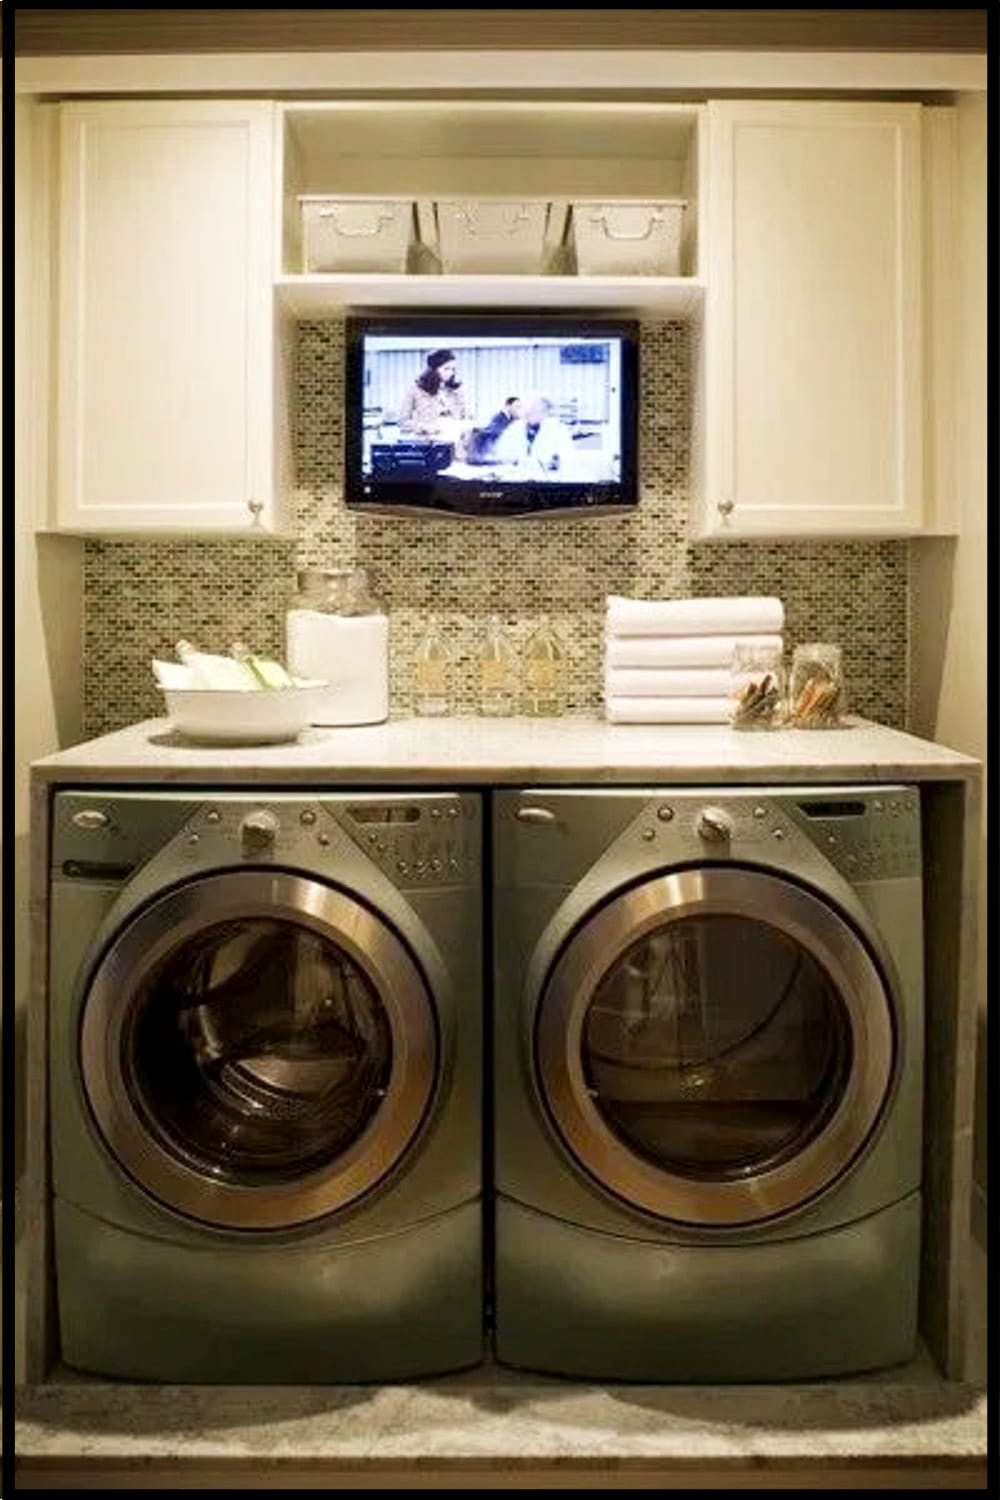 Simple Laundry Room Design and more laundry room ideas - clever and cute small laundry room ideas on a budget